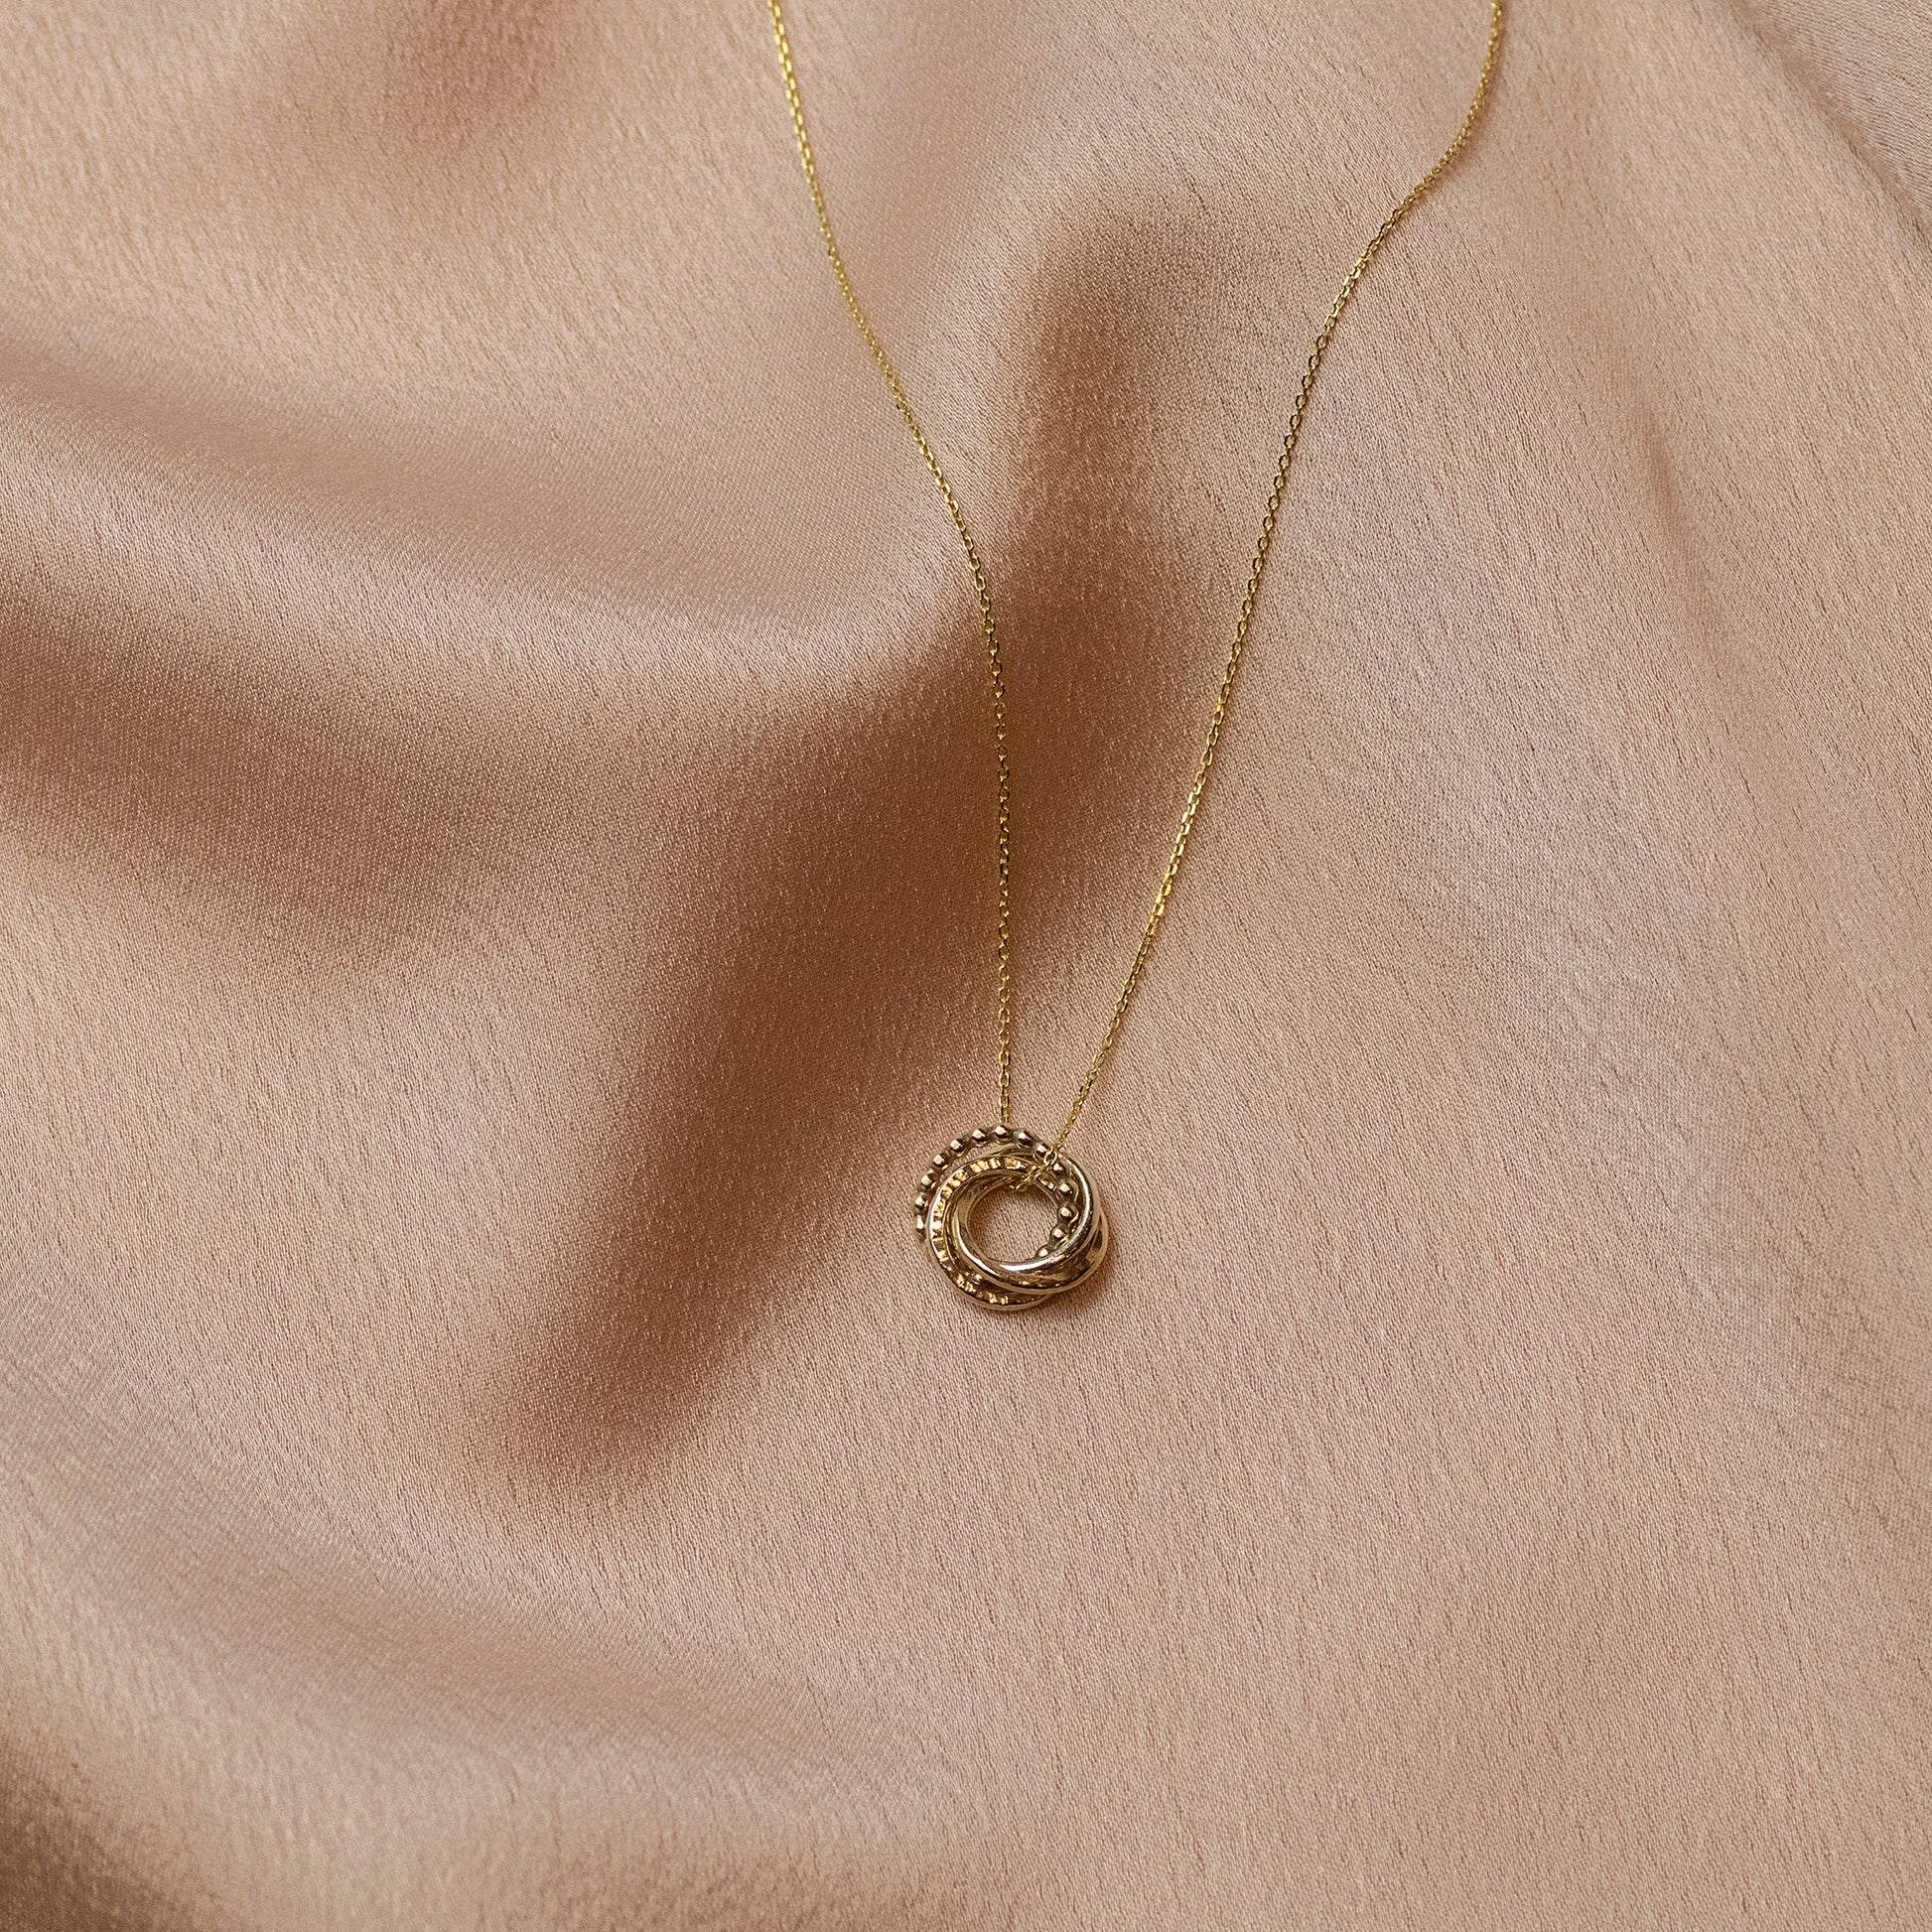 9kt Gold 4th Anniversary Love Knot Necklace -  The Original 4 Links for 4 Years Necklace - Recycled Gold, Rose Gold & White Gold